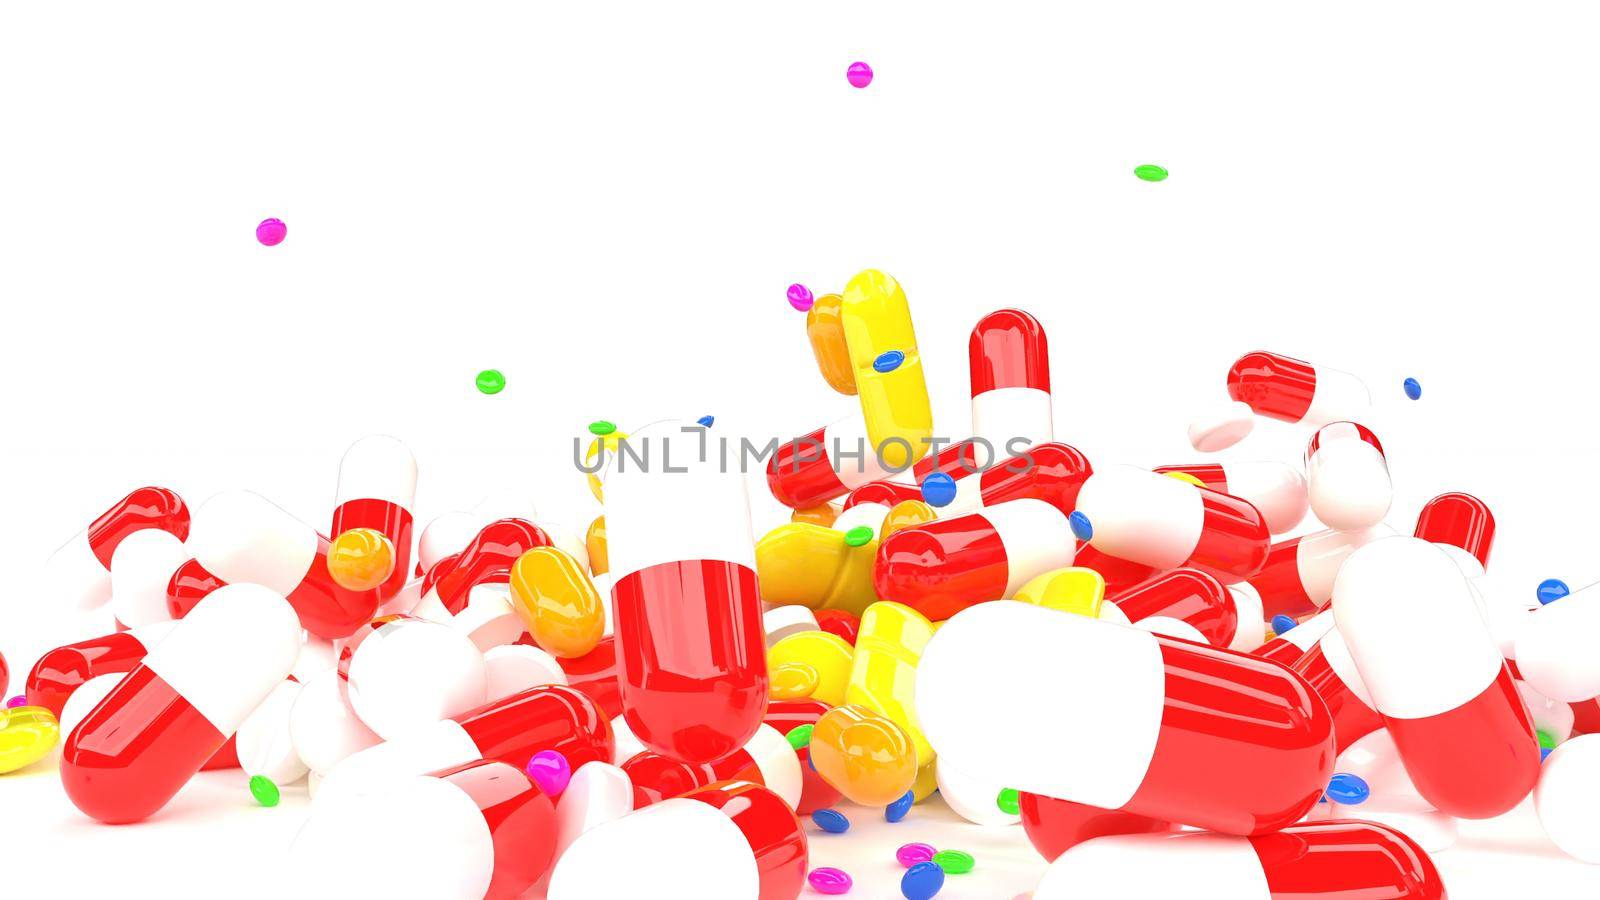 Classic color medicines pills fall on white surface Medical concept super slow motion 1000fps 3d render by Zozulinskyi